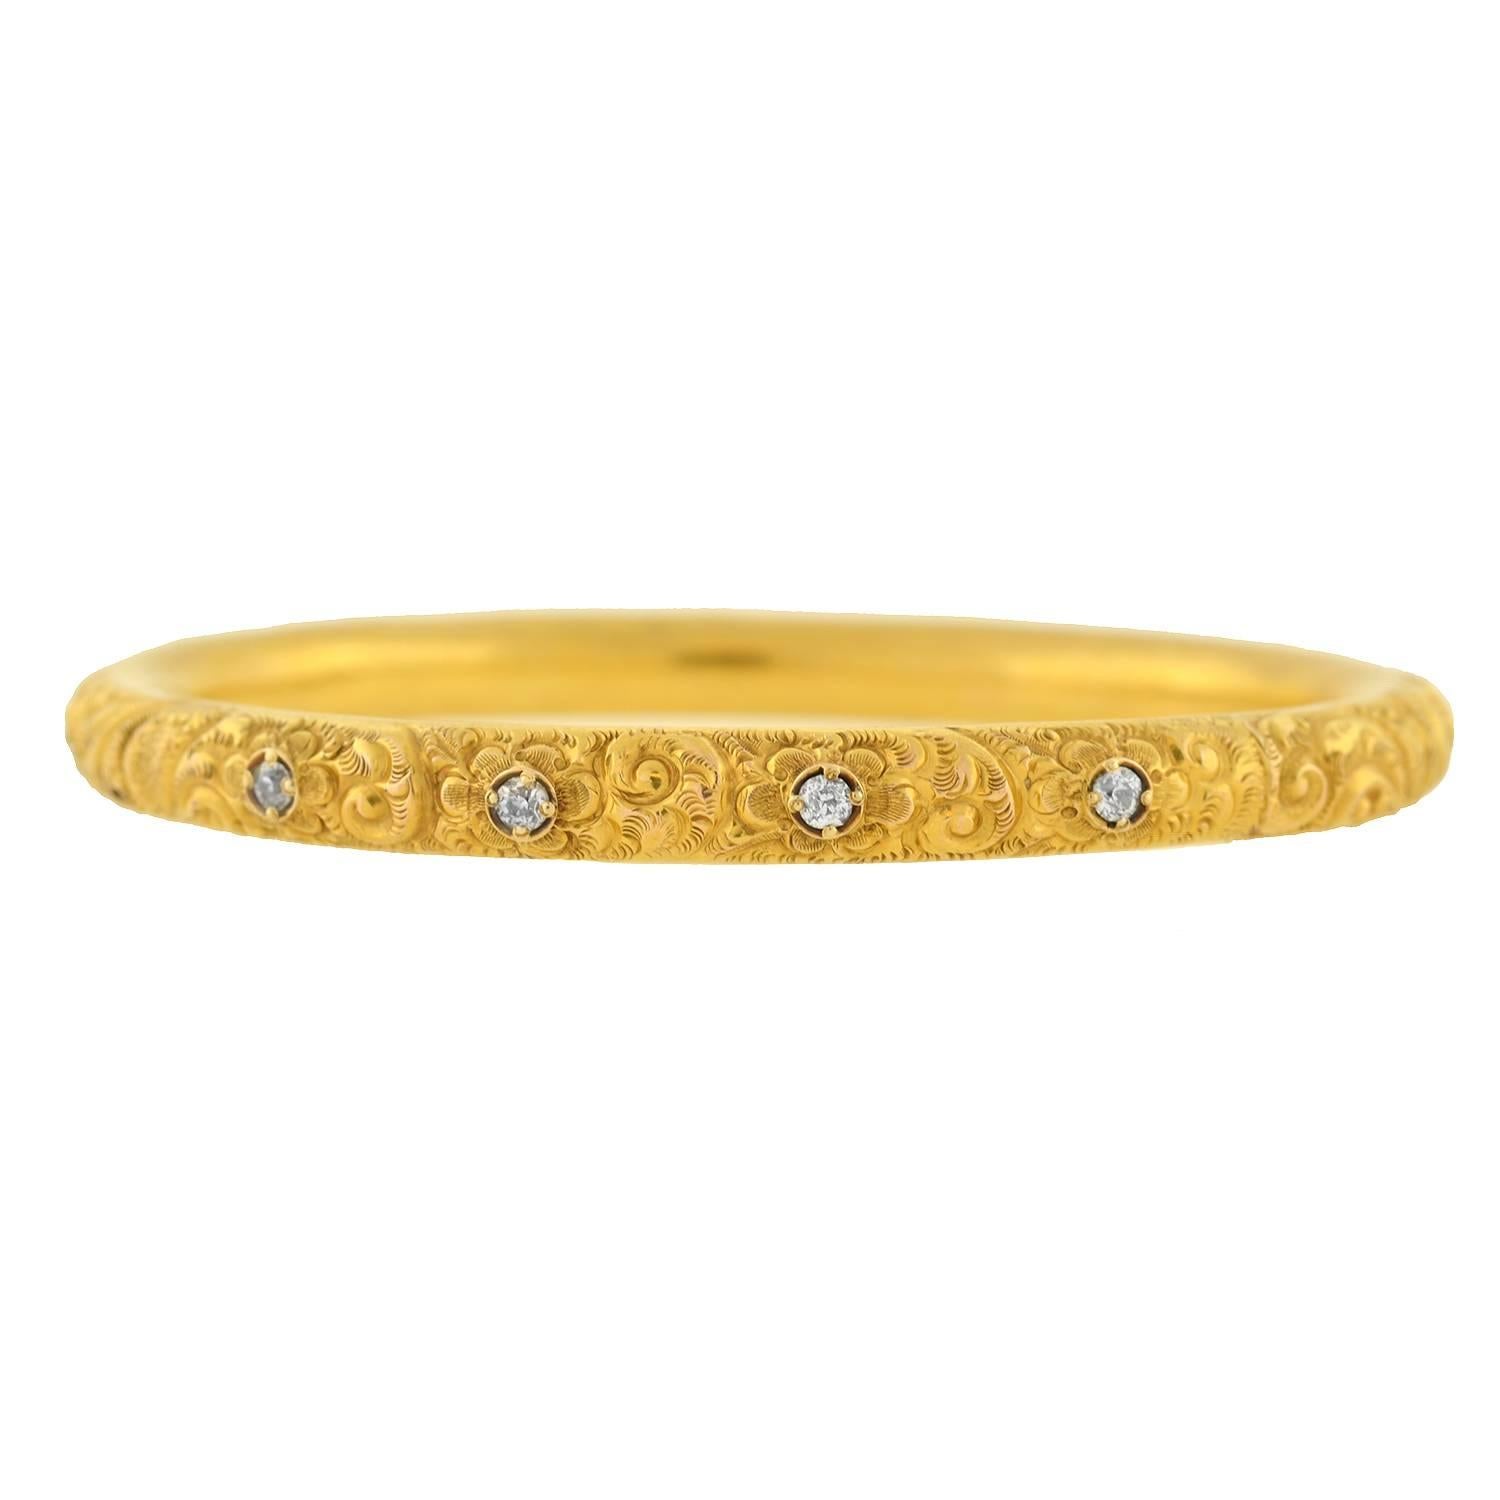 A stunning gold and diamond repousse bangle bracelet from the Victorian (ca1860) era! This lovely bracelet is made of vibrant 15kt yellow gold and is intricately detailed with a stunning floral and scrolled repousse motif along the surface of the